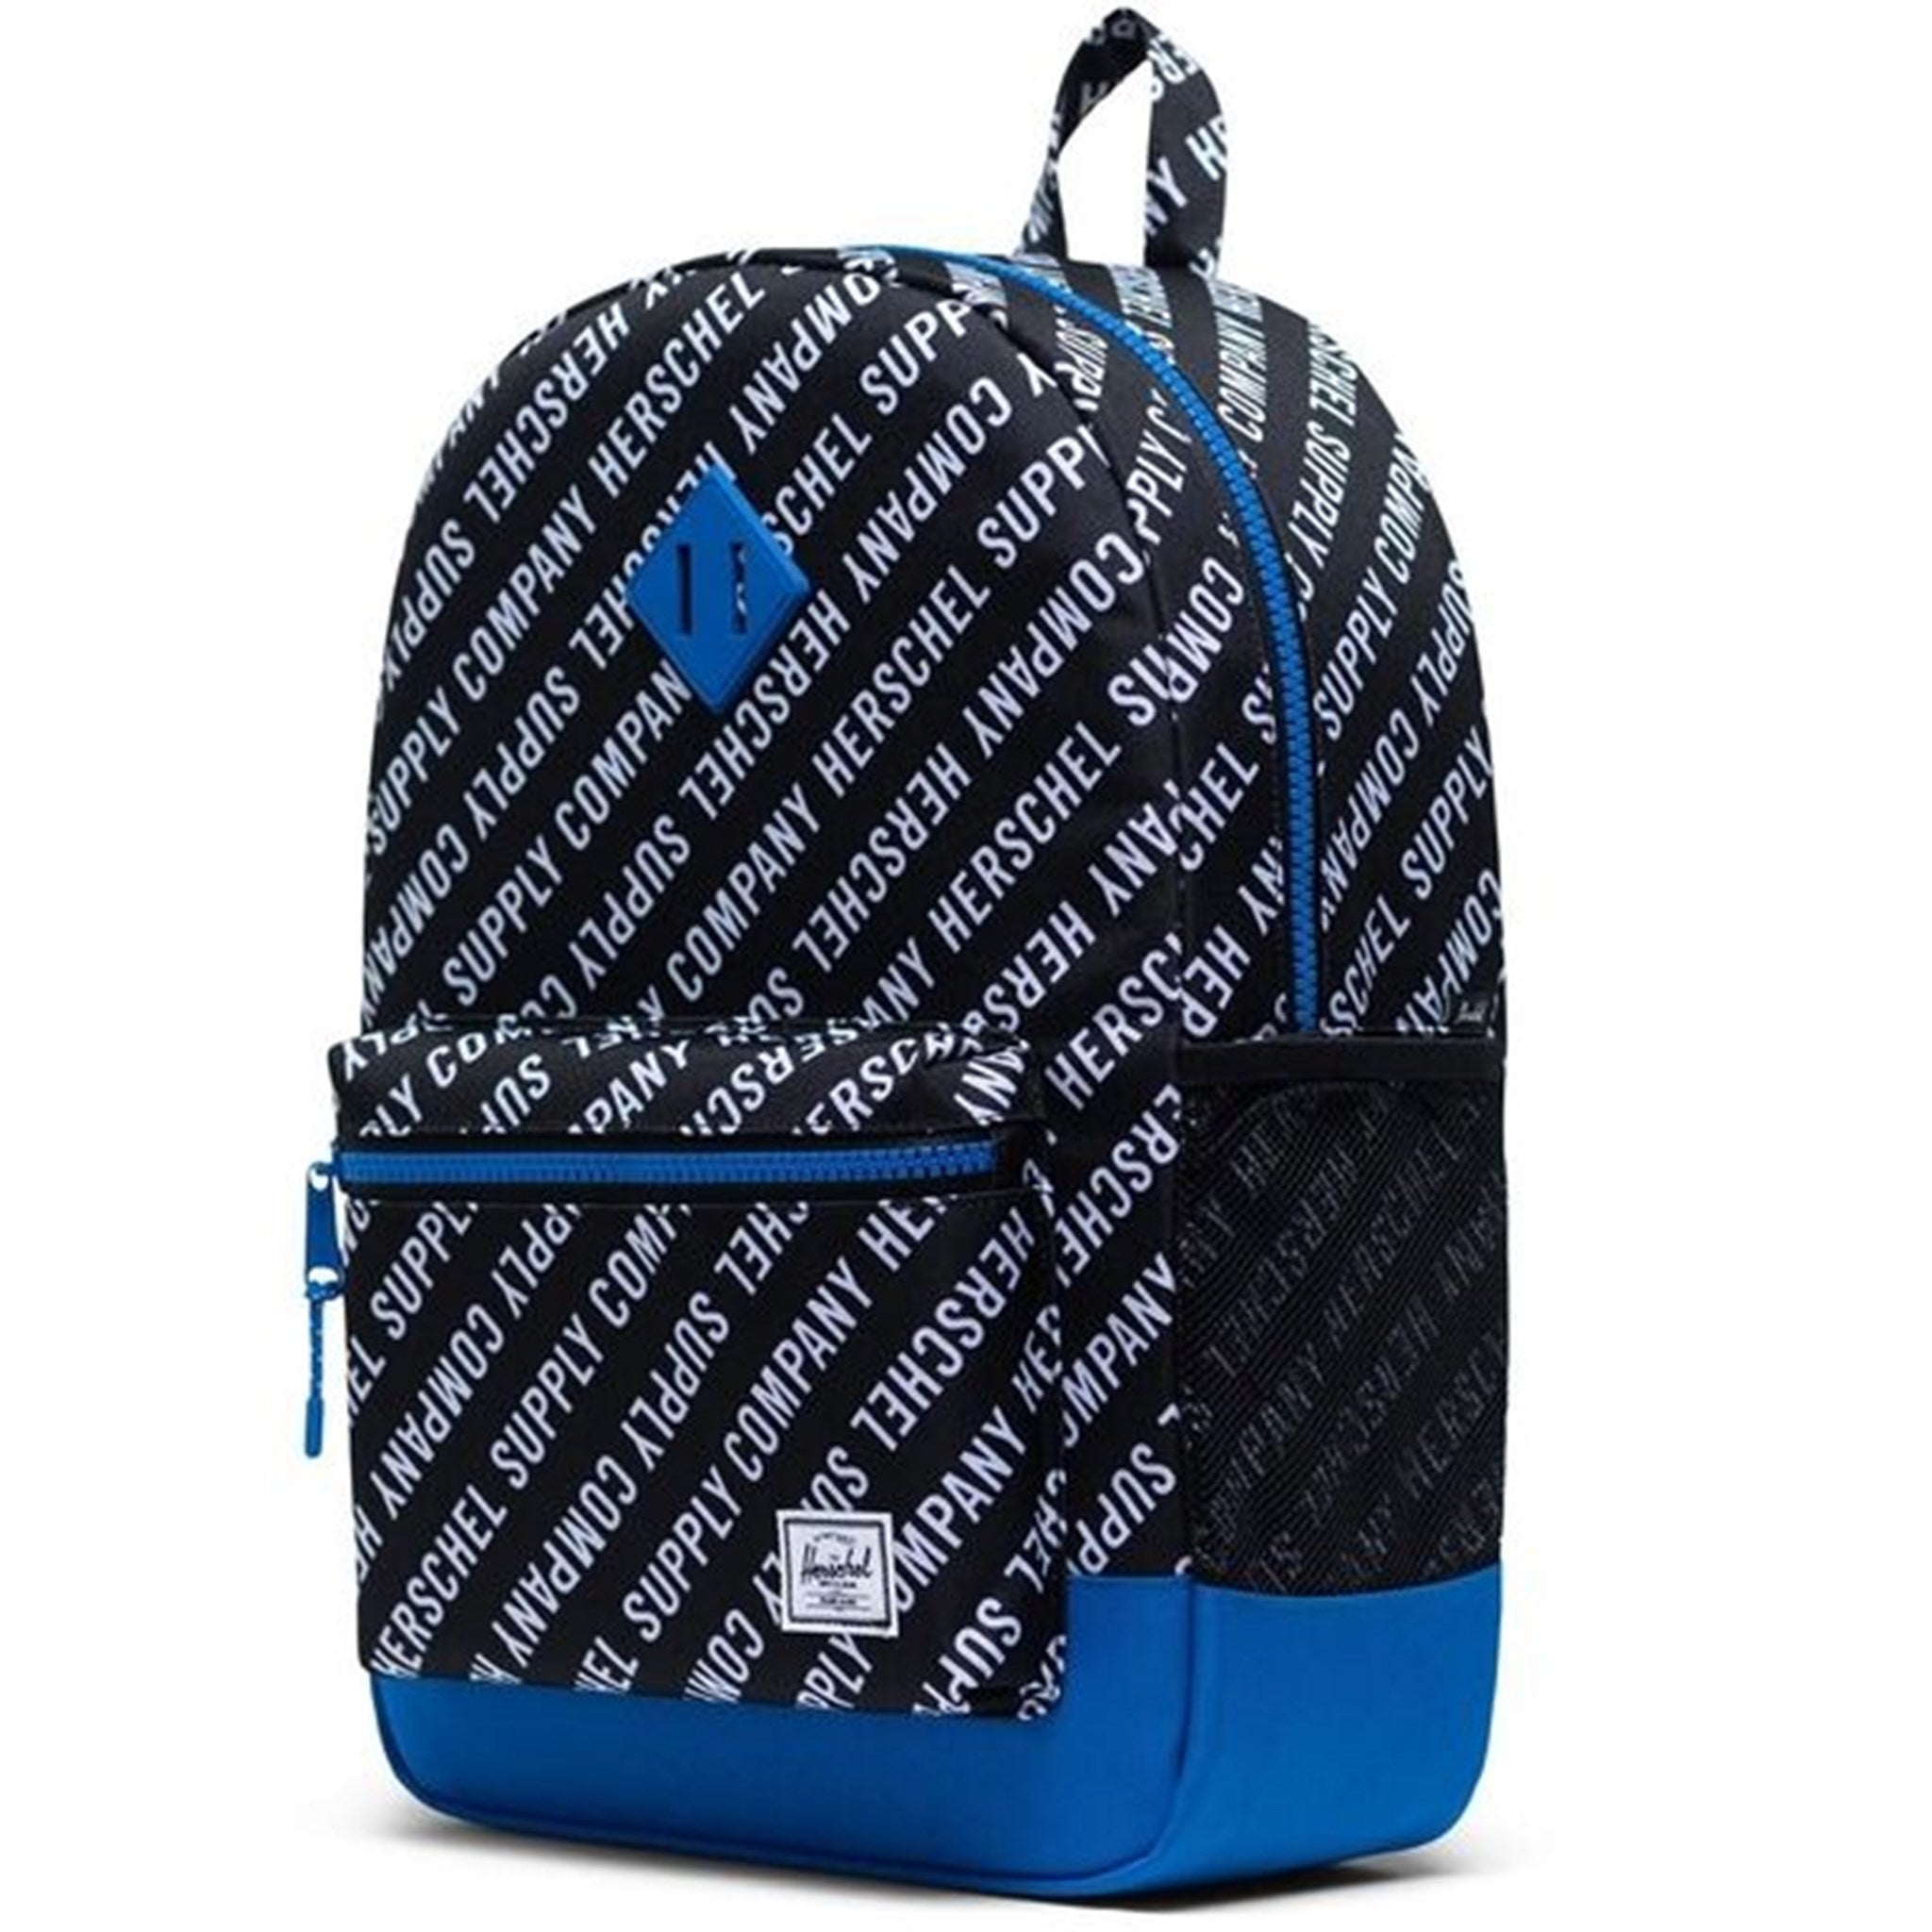 Herschel Heritage Youth XL Backpack Roll Call Black/White/Lapis Blue 3